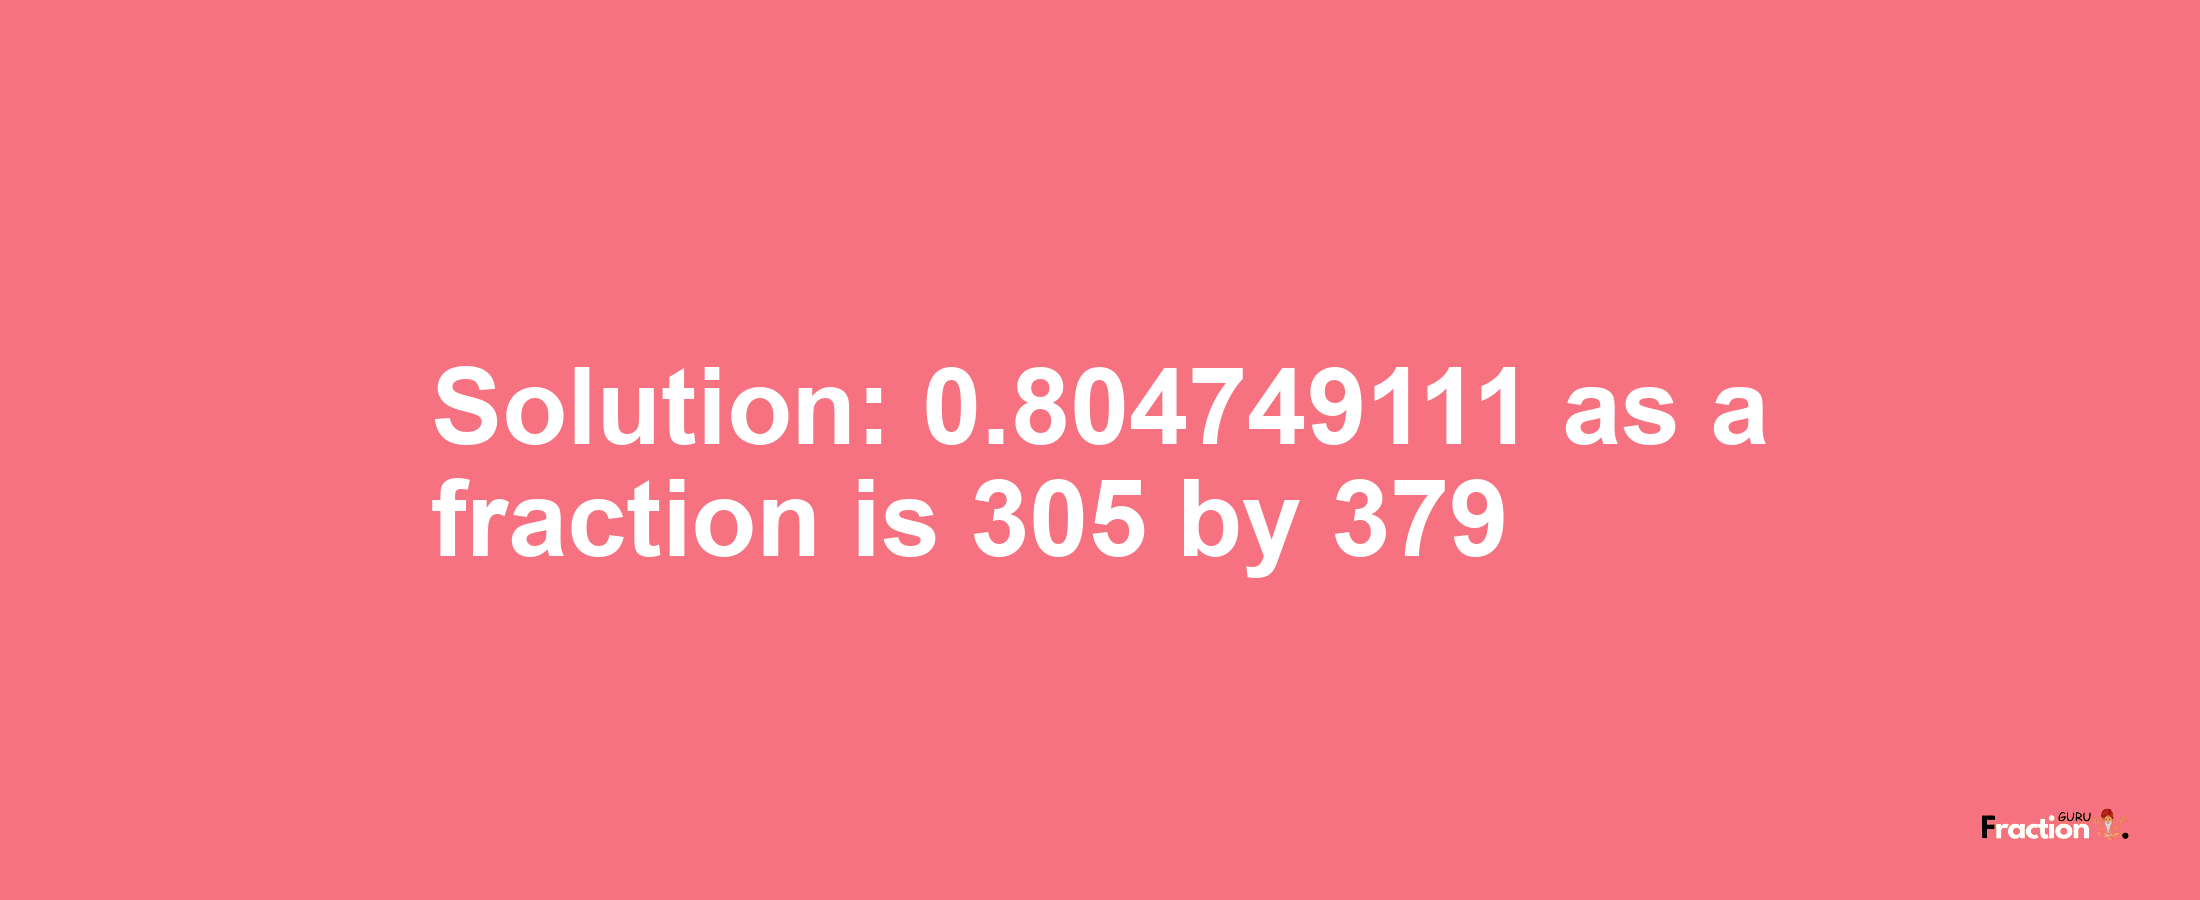 Solution:0.804749111 as a fraction is 305/379